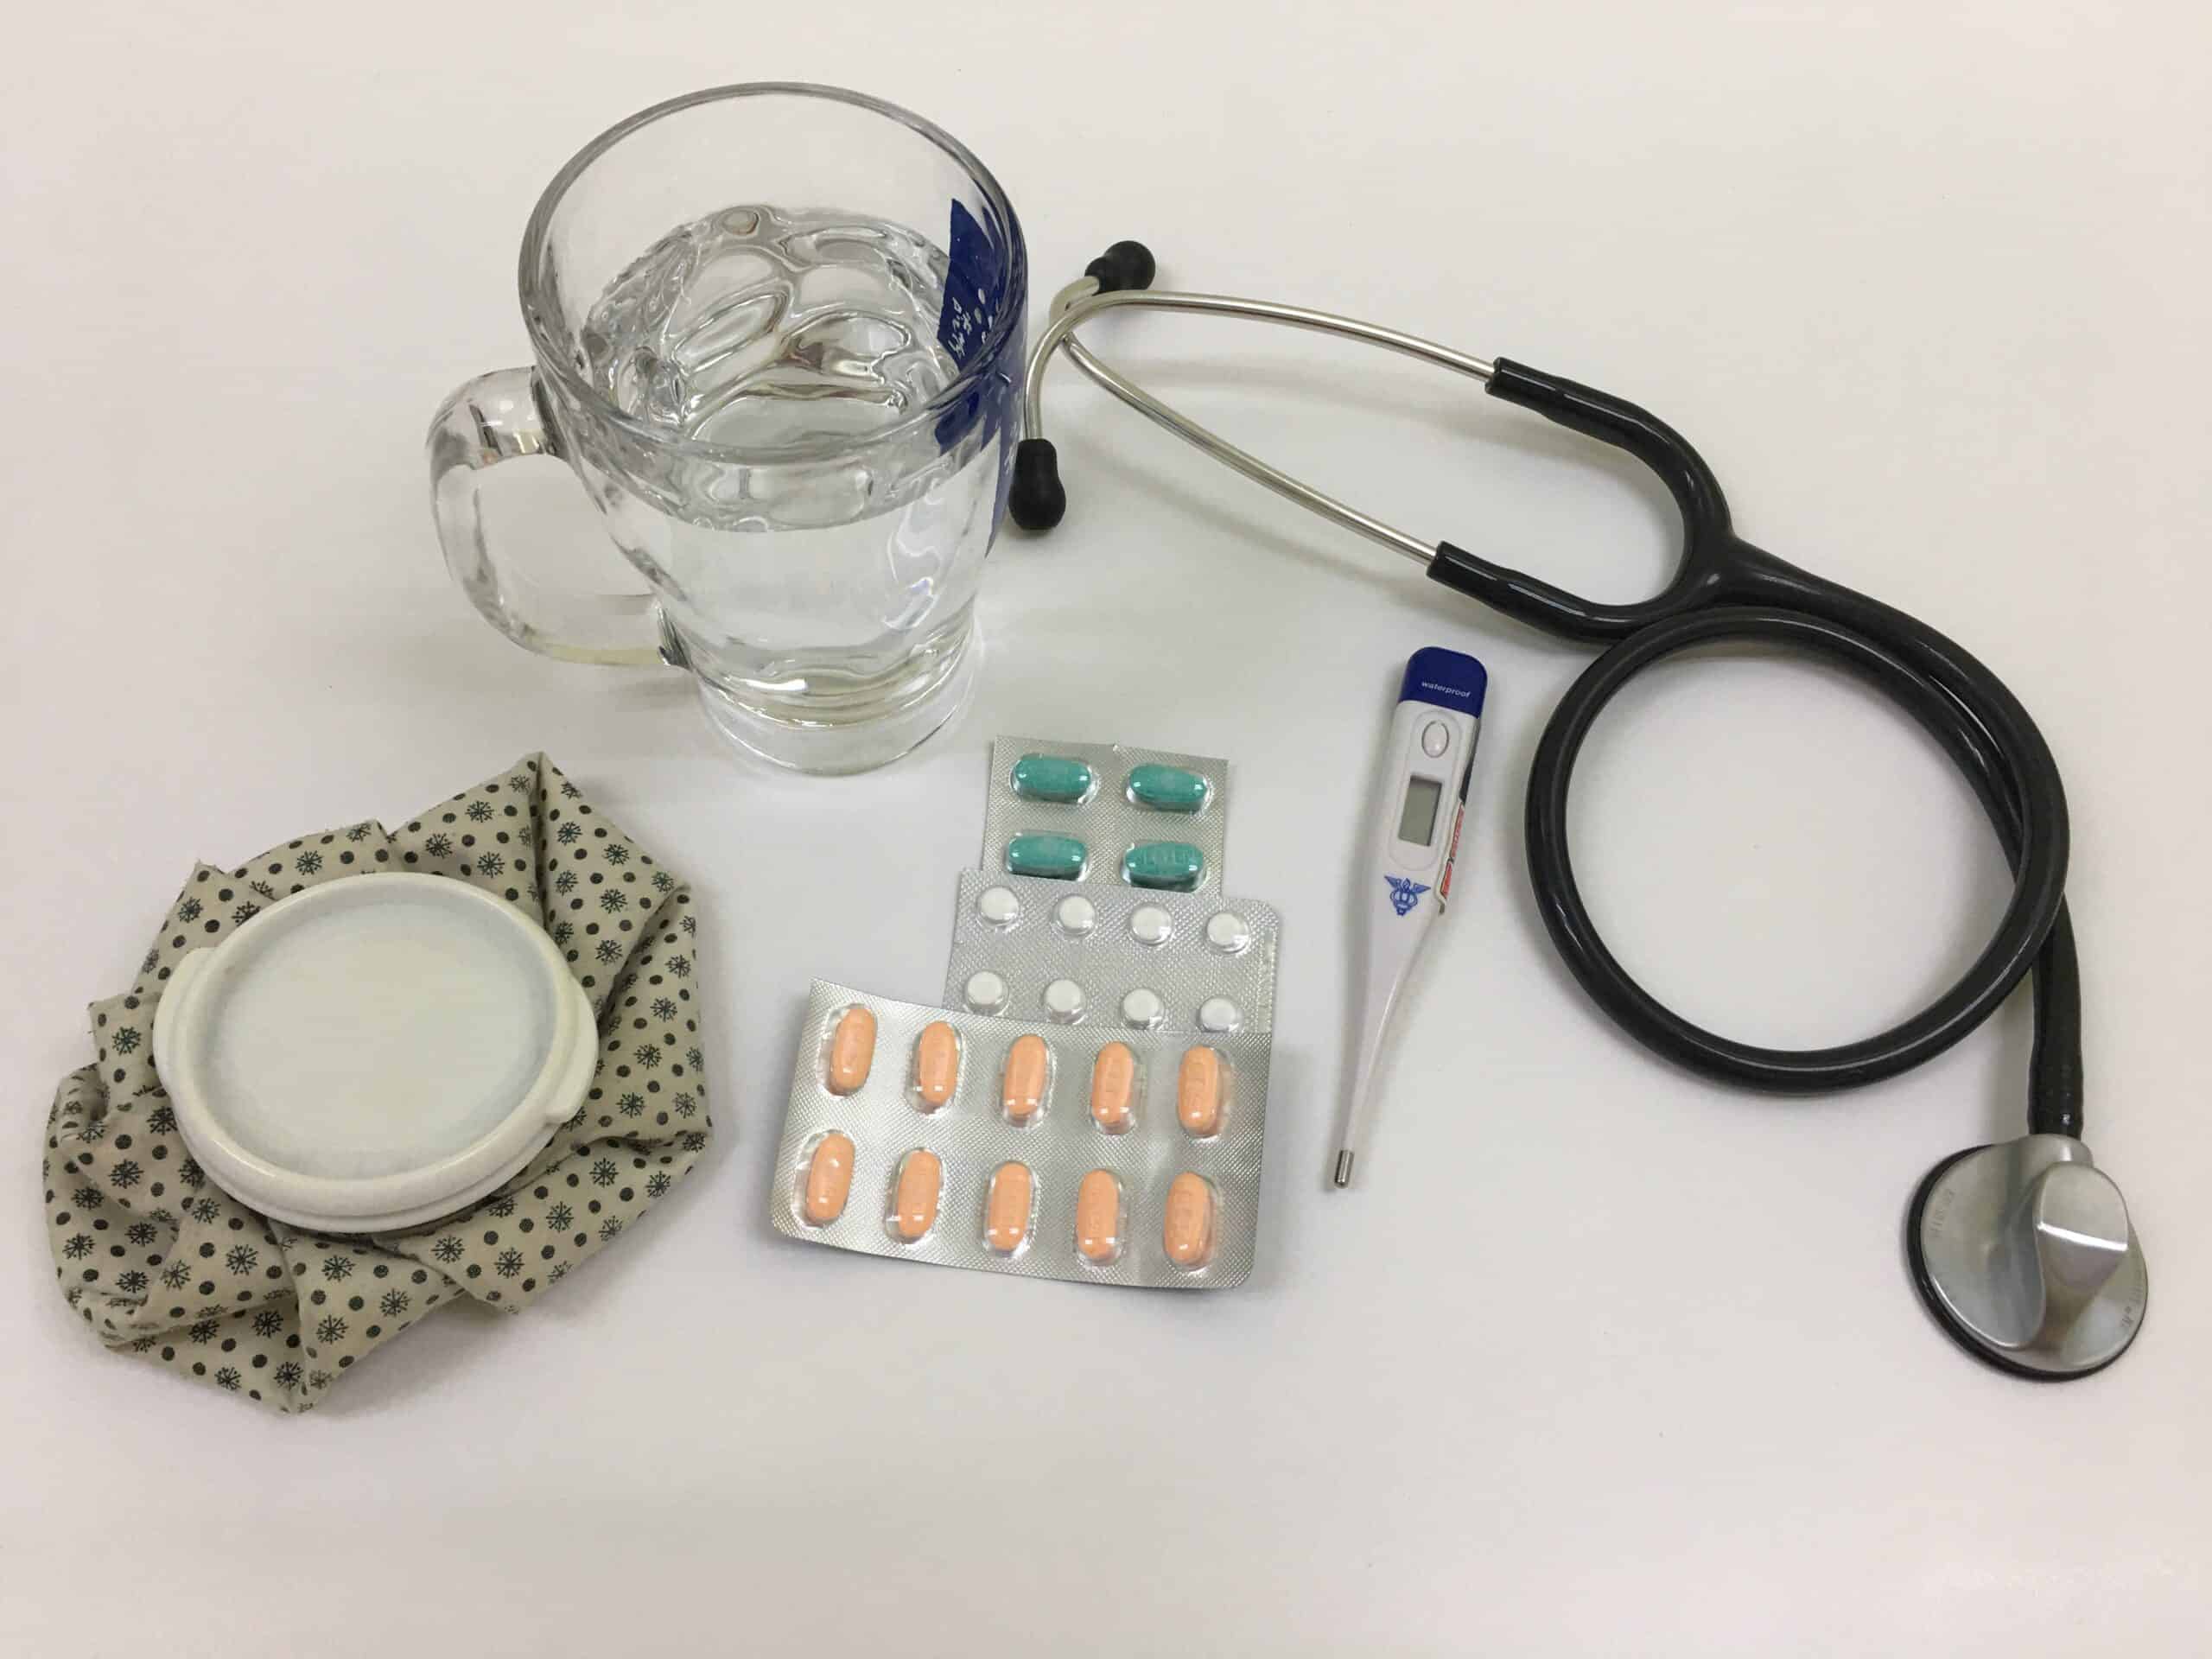 Medicine tablets, stethoscope and cup of water